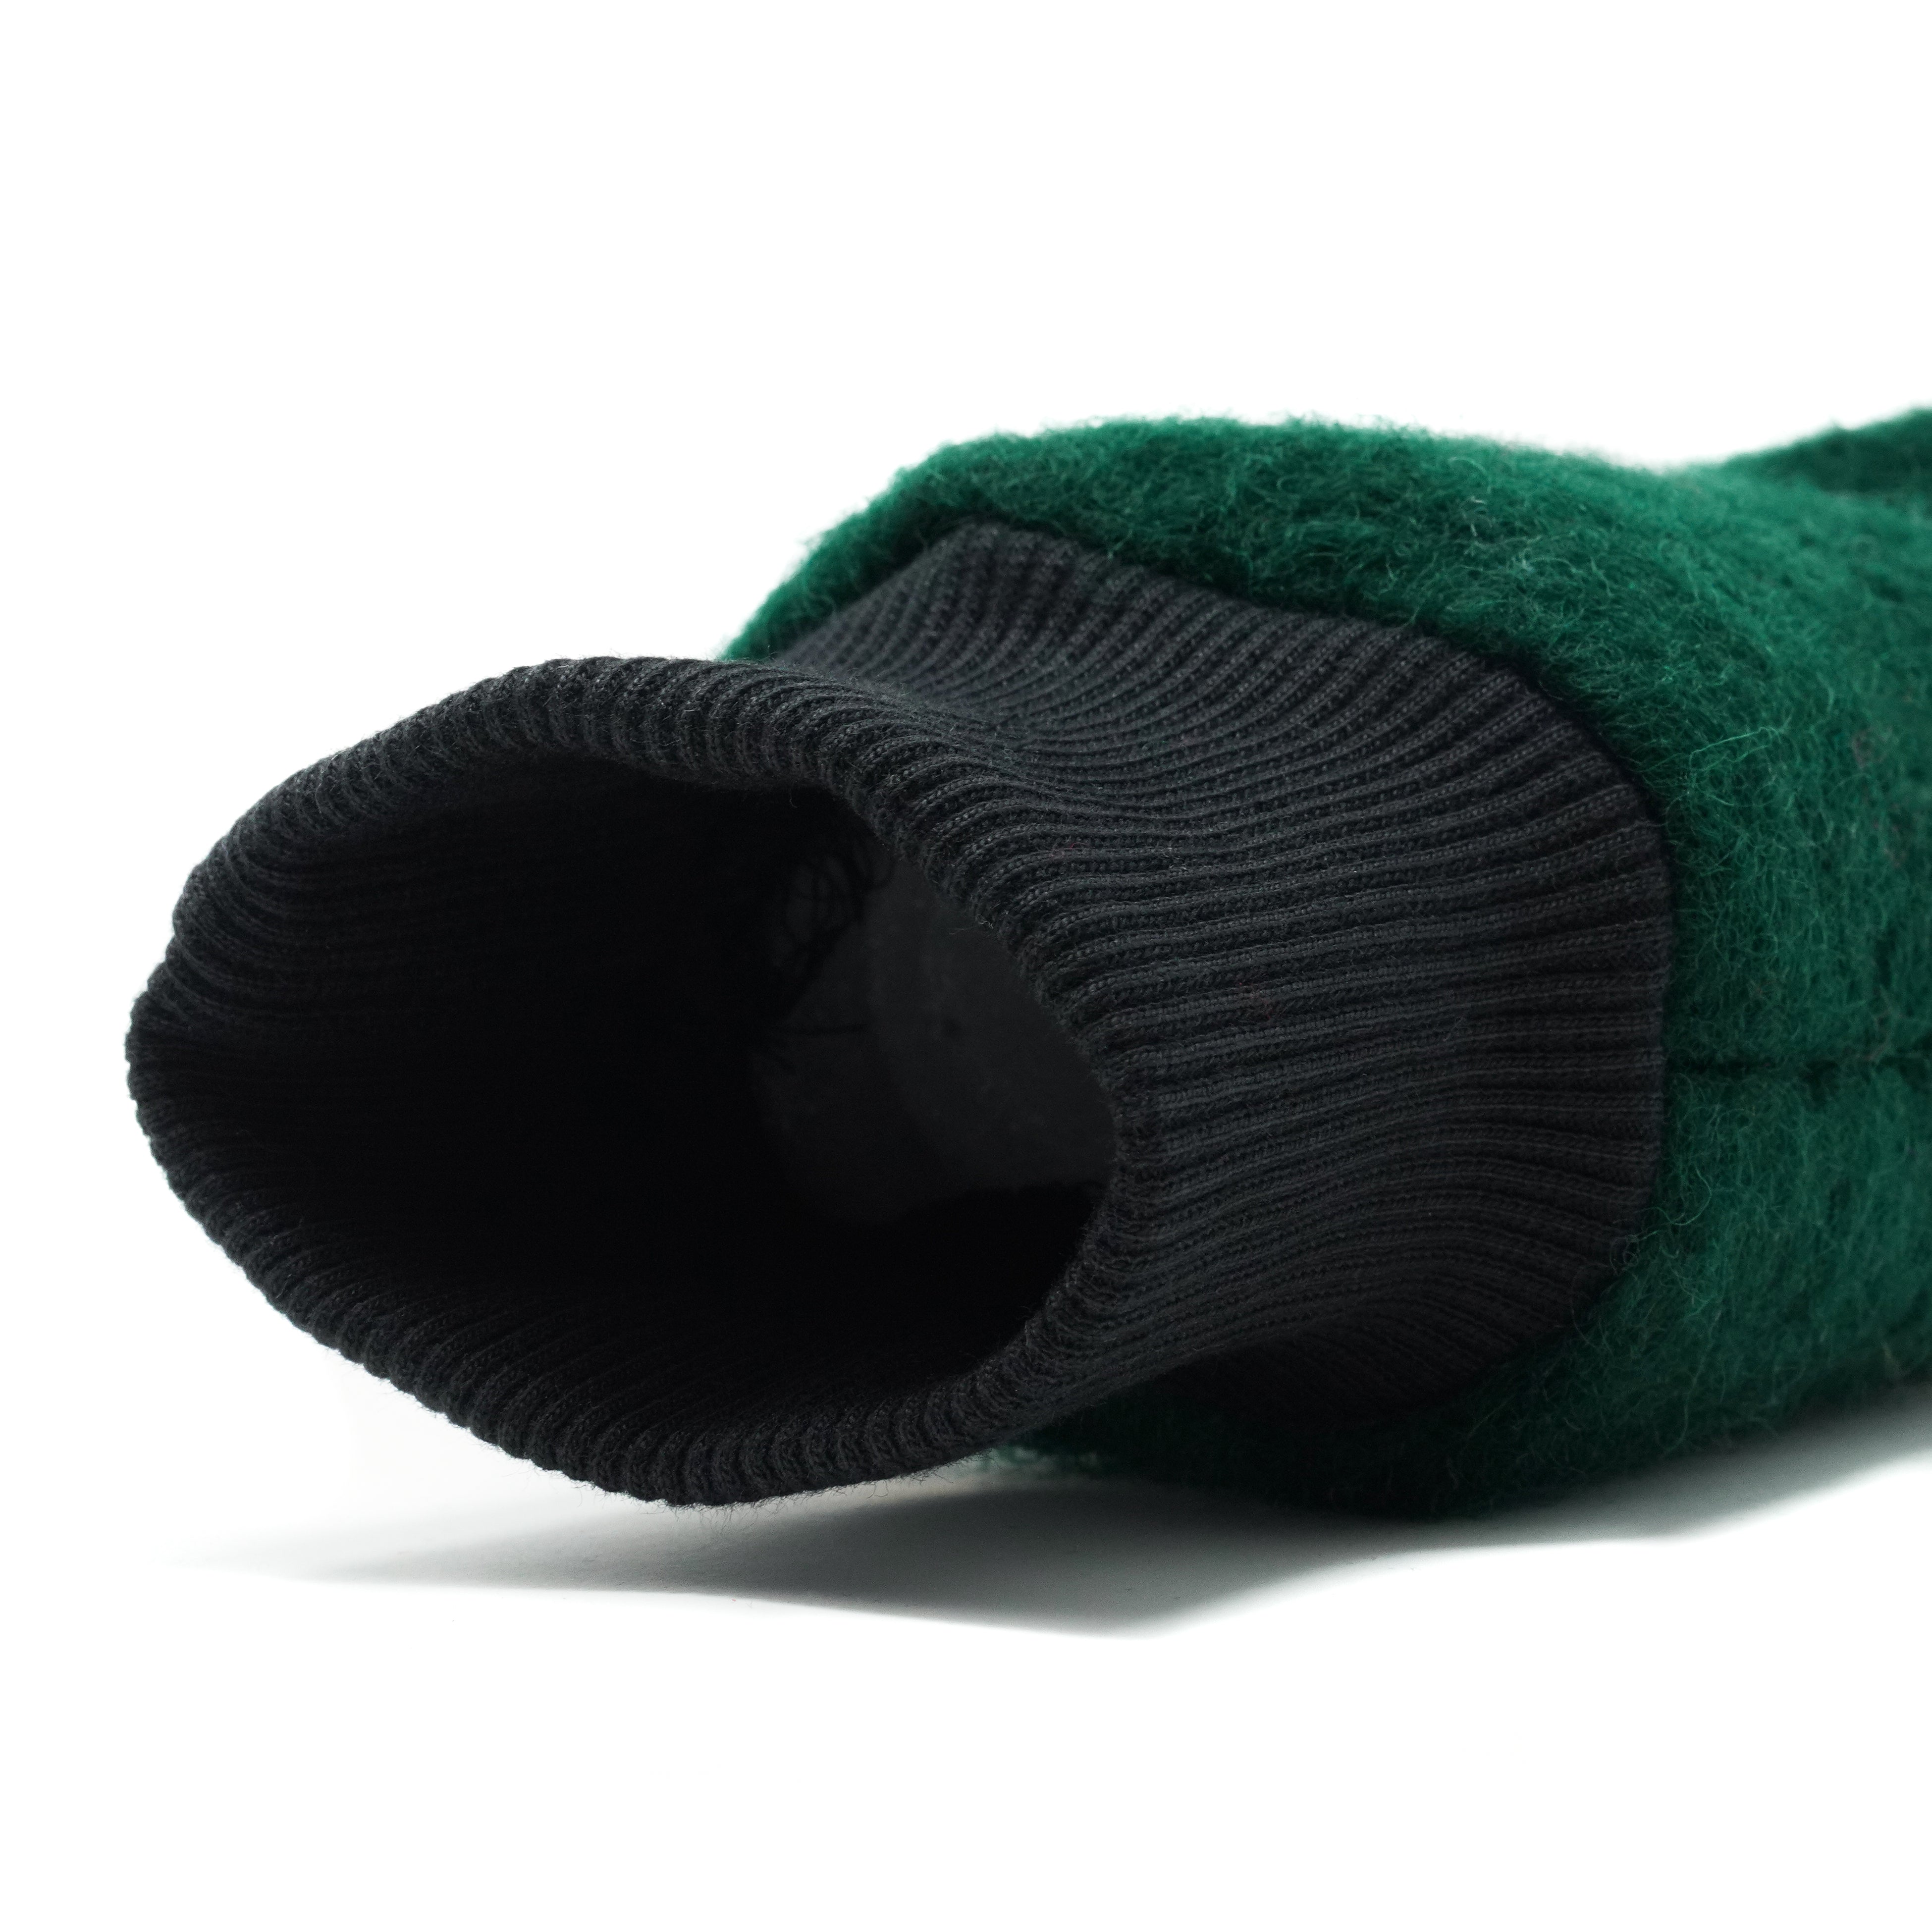 MITTENS - LIMITED EDITION - Green 